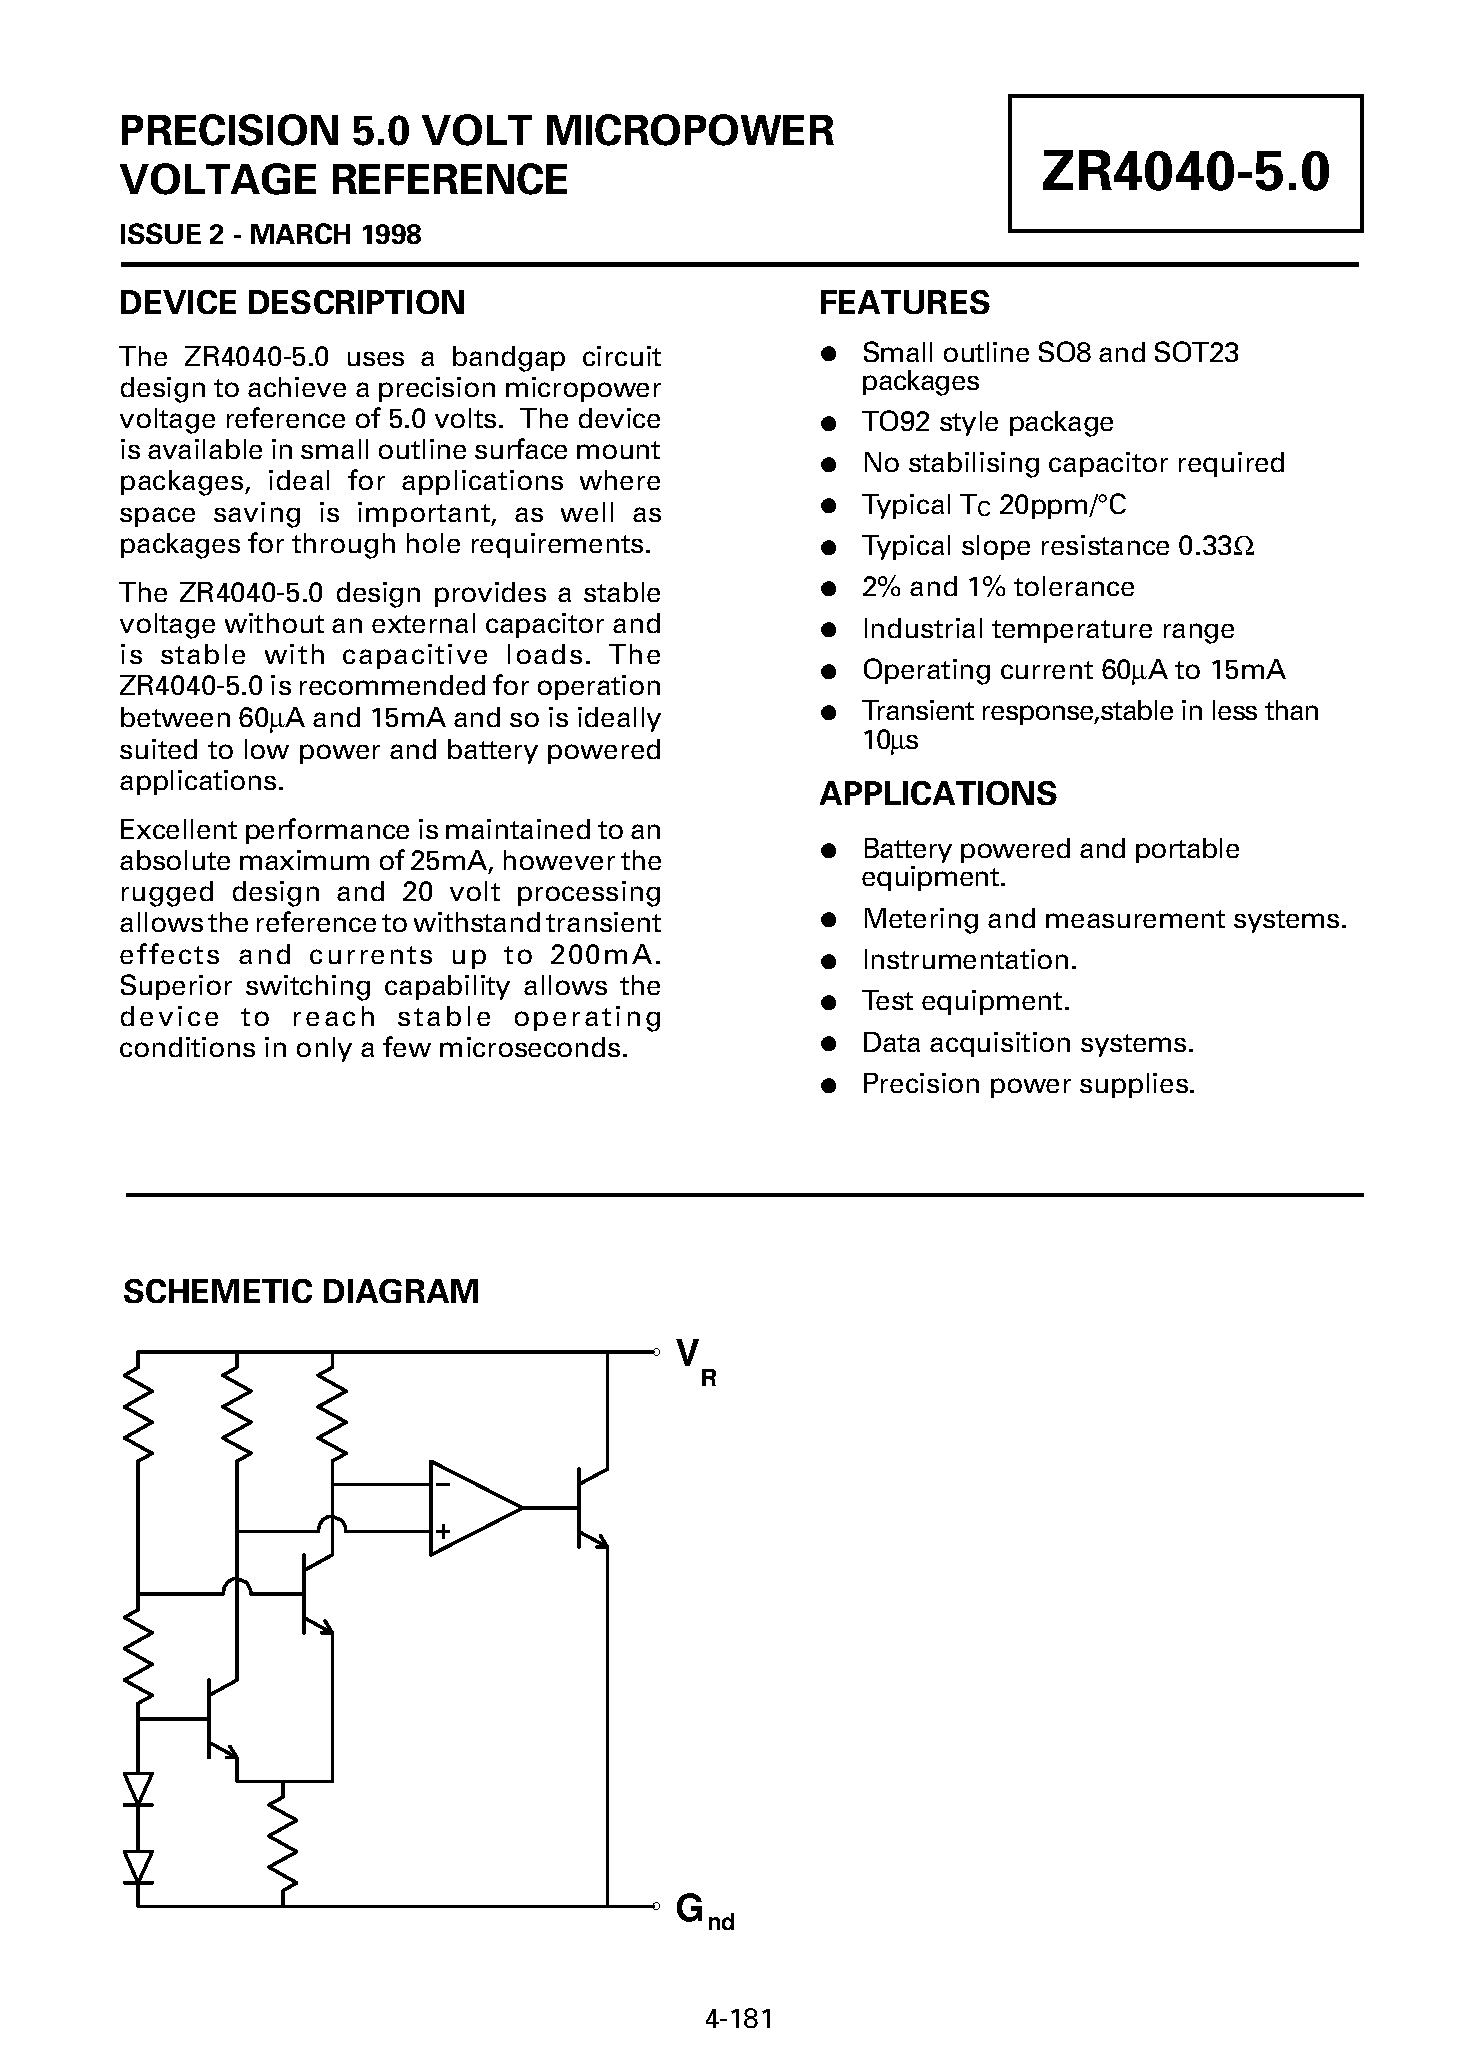 Datasheet ZR4040-5 - PRECISION 5.0 VOLT MICROPOWER VOLTAGE REFERENCE page 1